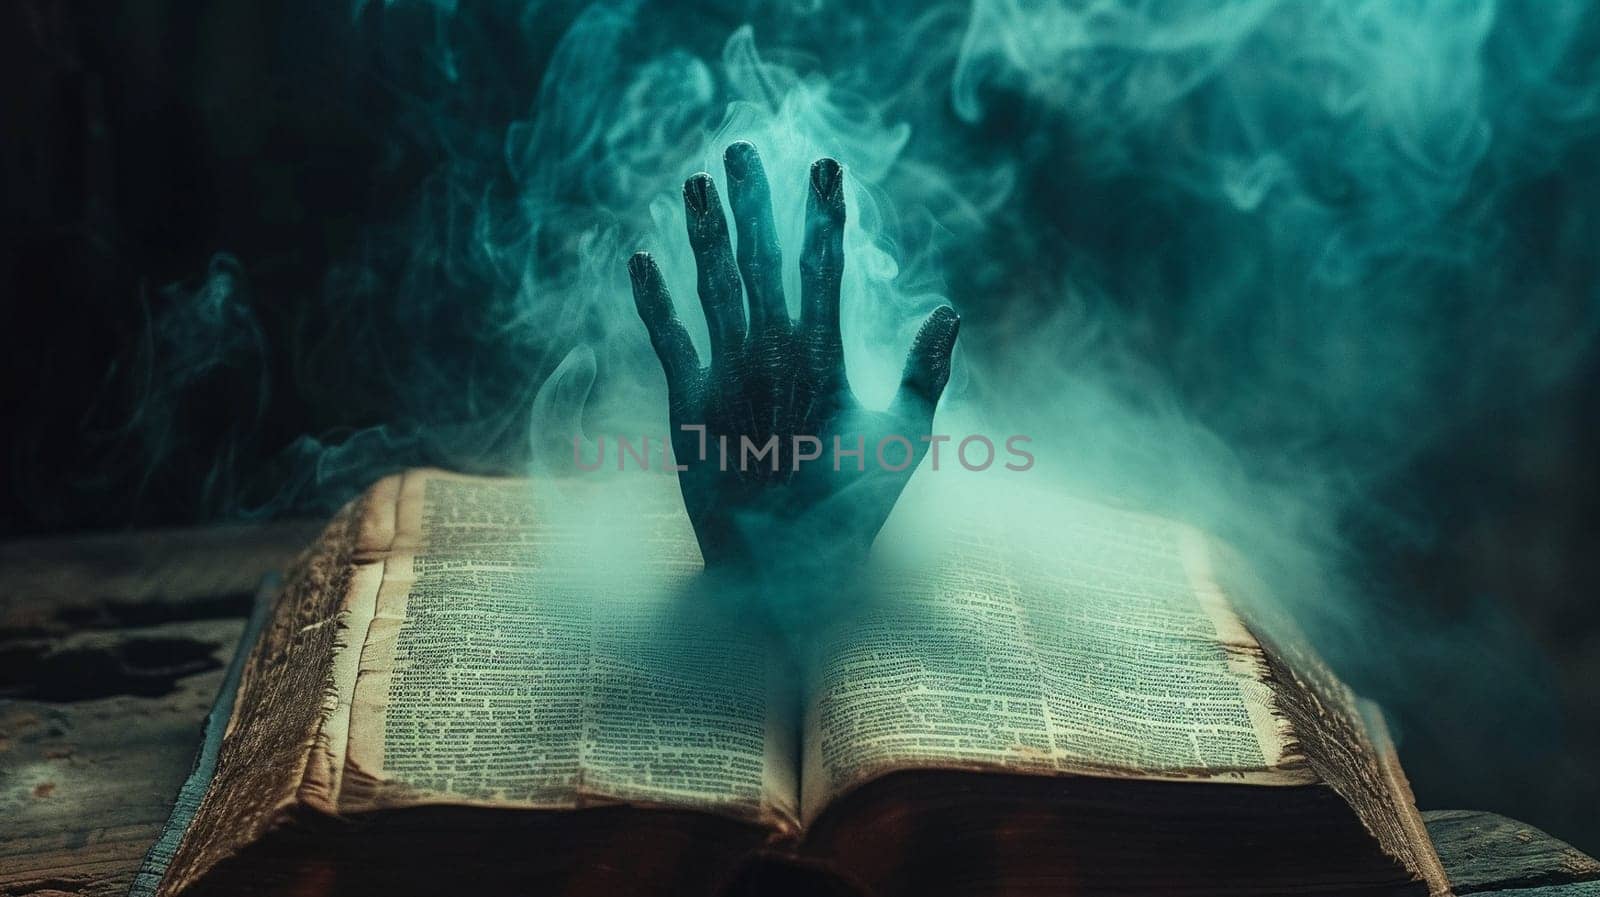 An ancient magic book with spirits. A scary and mysterious old book by NeuroSky